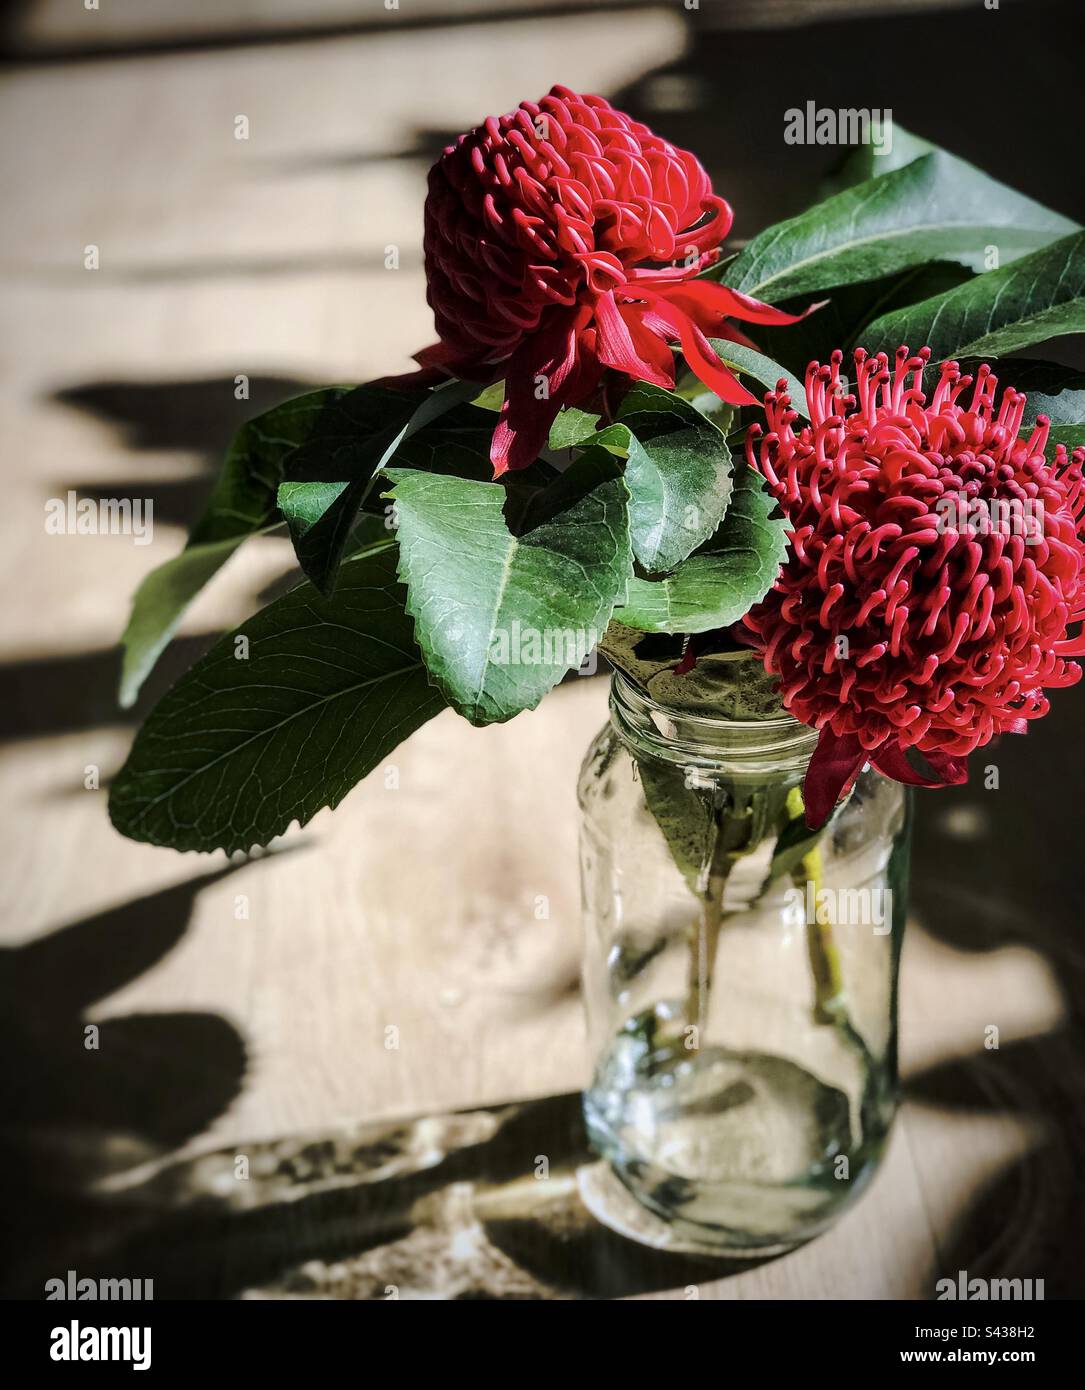 Close-up of two stalks of red waratah flowers, Telopea speciosissima,in a glass jar on shadow patterned wooden table. Stock Photo